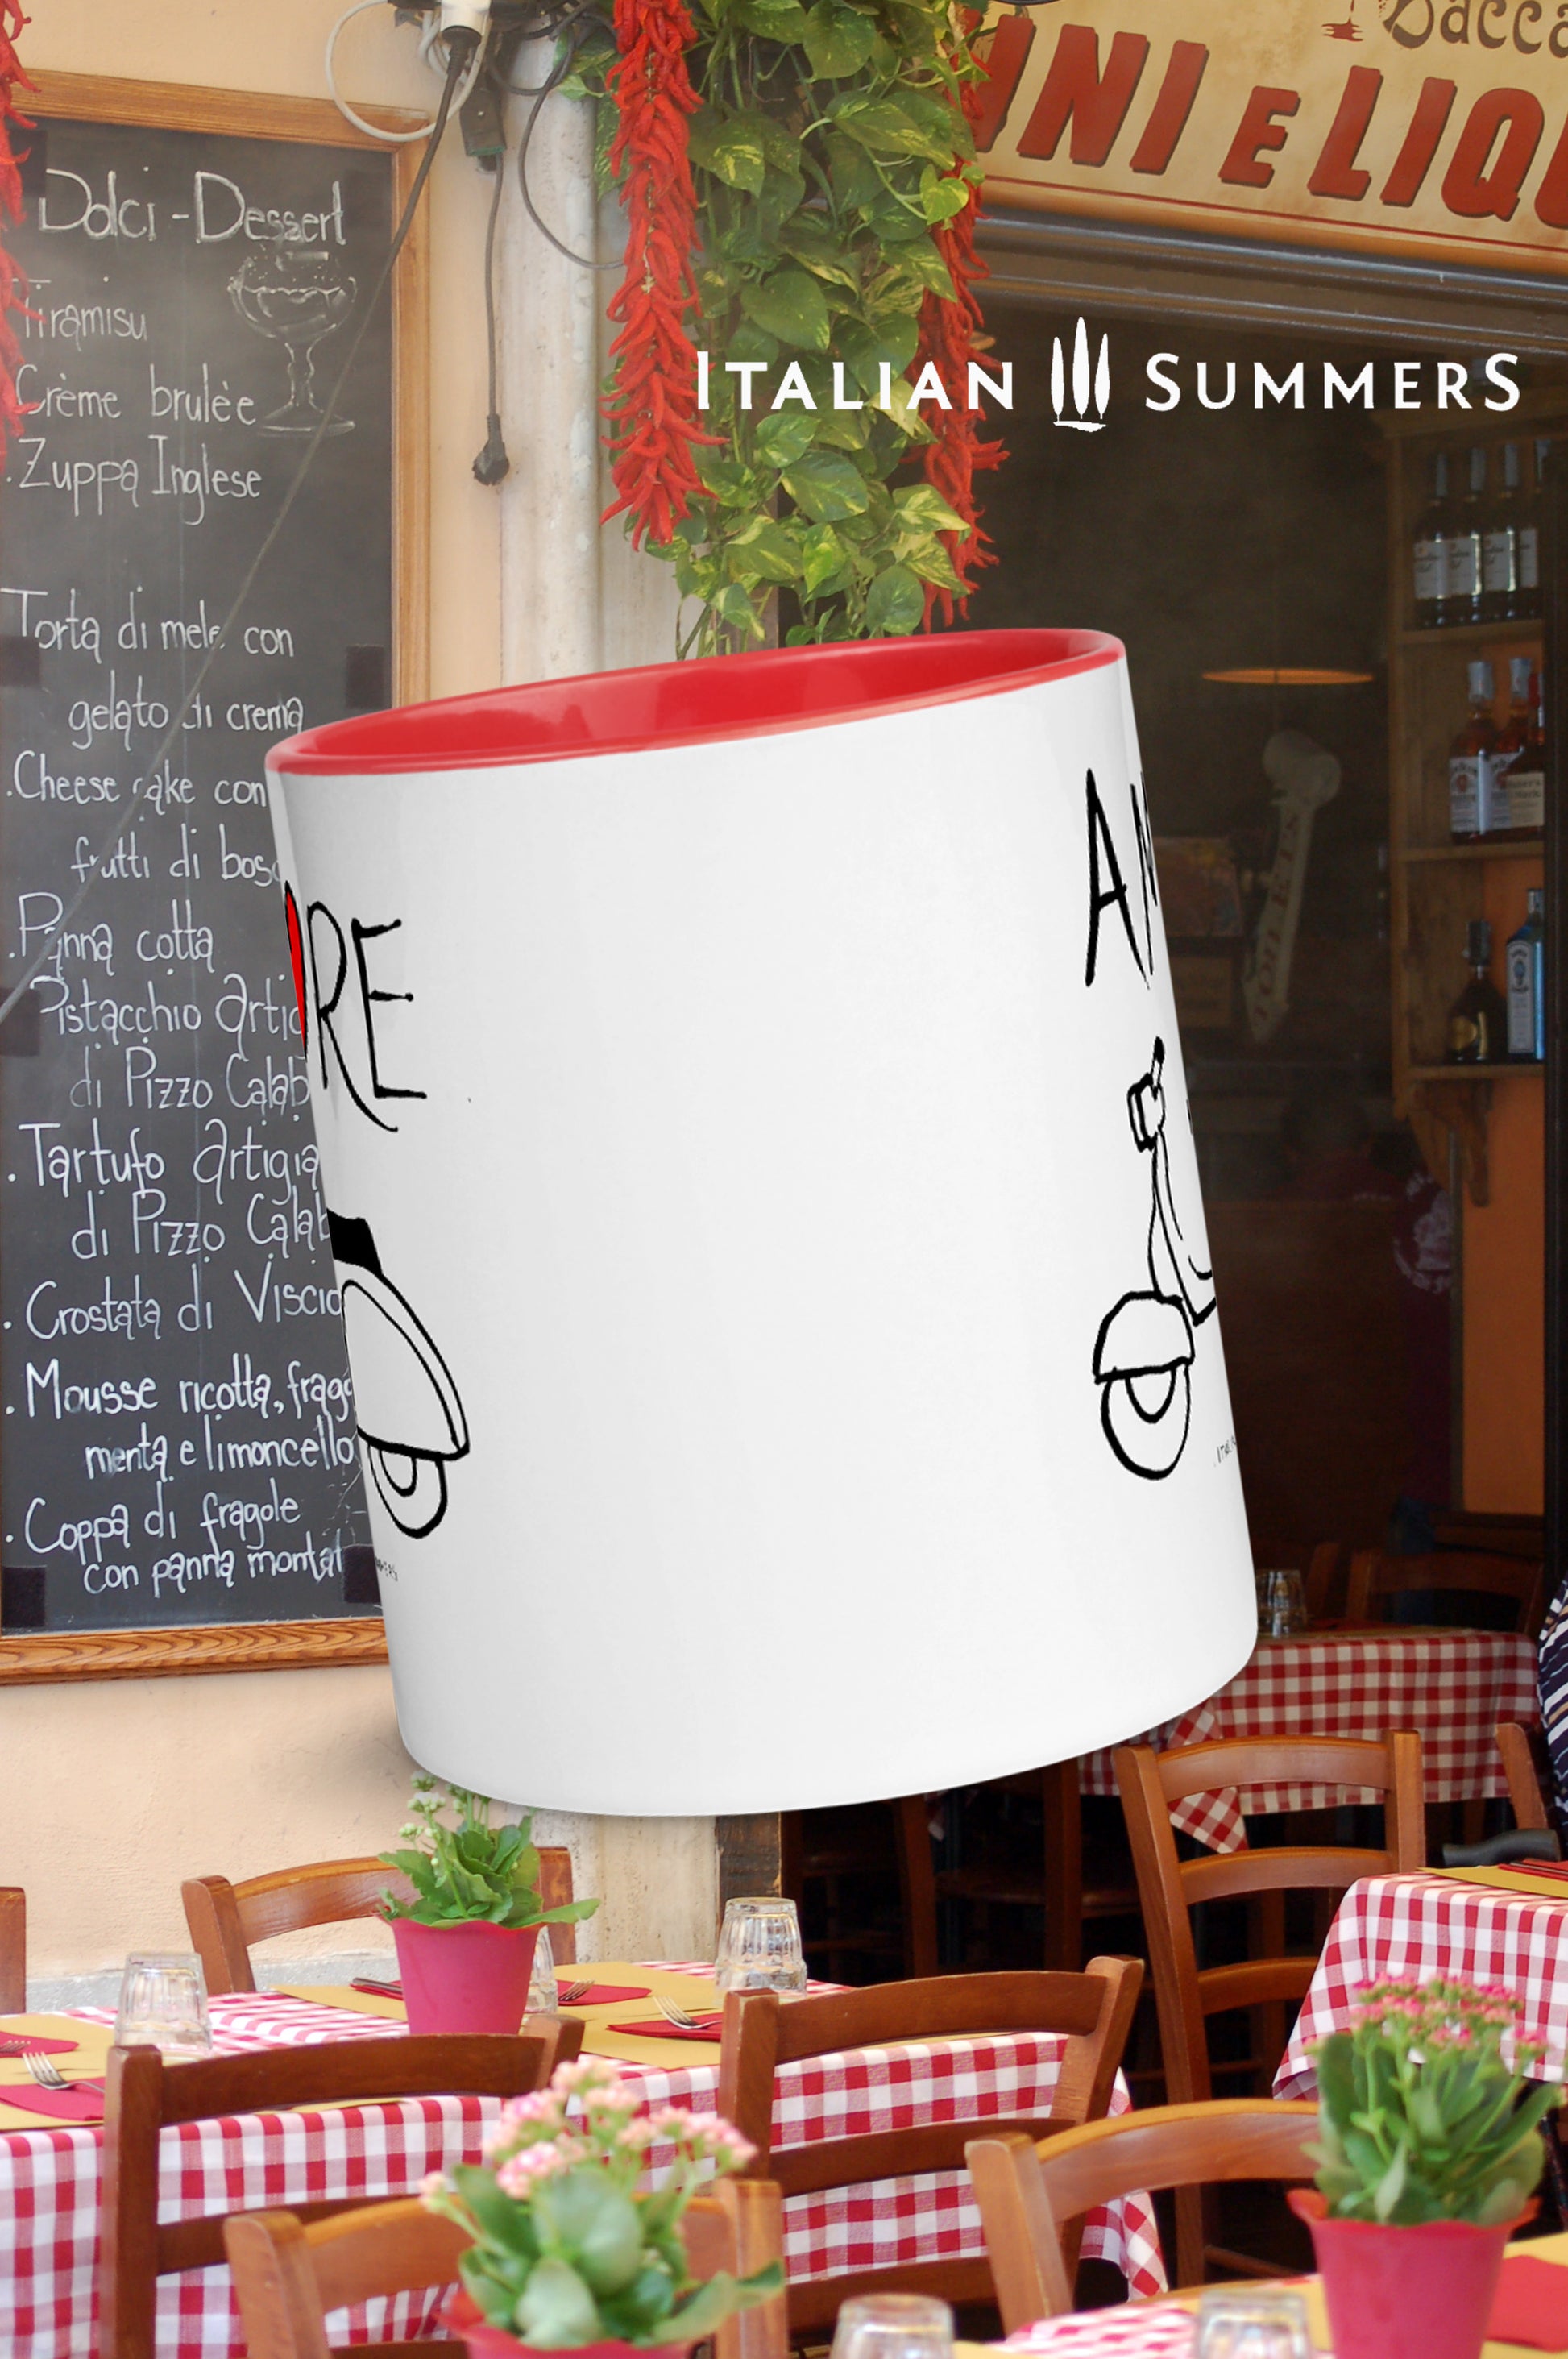 Italy inspired coffee mug with a sketch of a vintage Italian Vespa, a line dwawing. Above the Vespa is written the word AMORE in handwriting. The 'O ' in amore has is a red heart. The Italian coffee mug is printed a 2 sides. Available with a red inside/handle / or white. Made with amore by Italian Summers